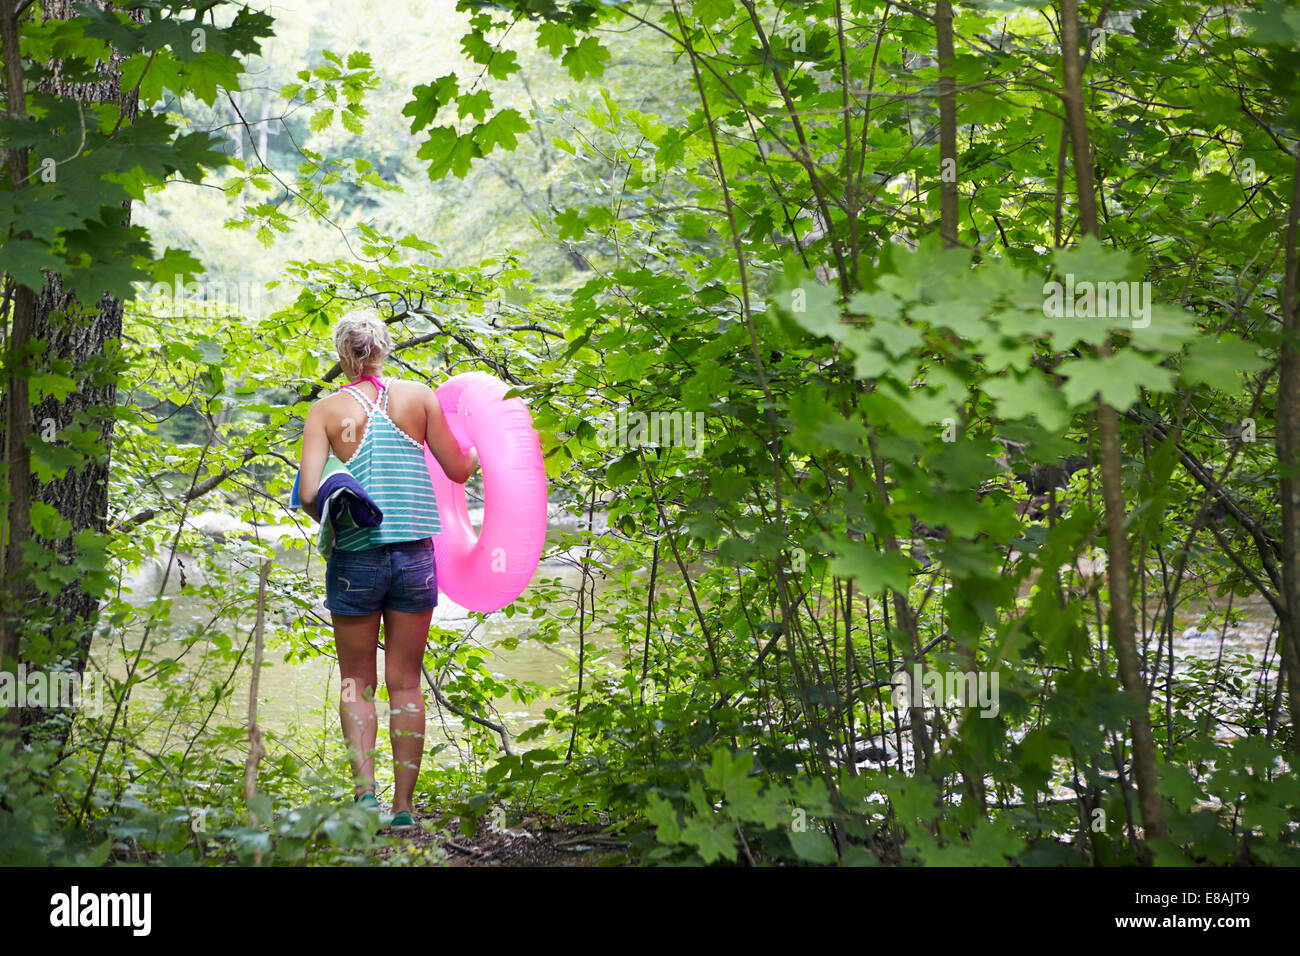 Hiker in forest with inflatable ring Stock Photo